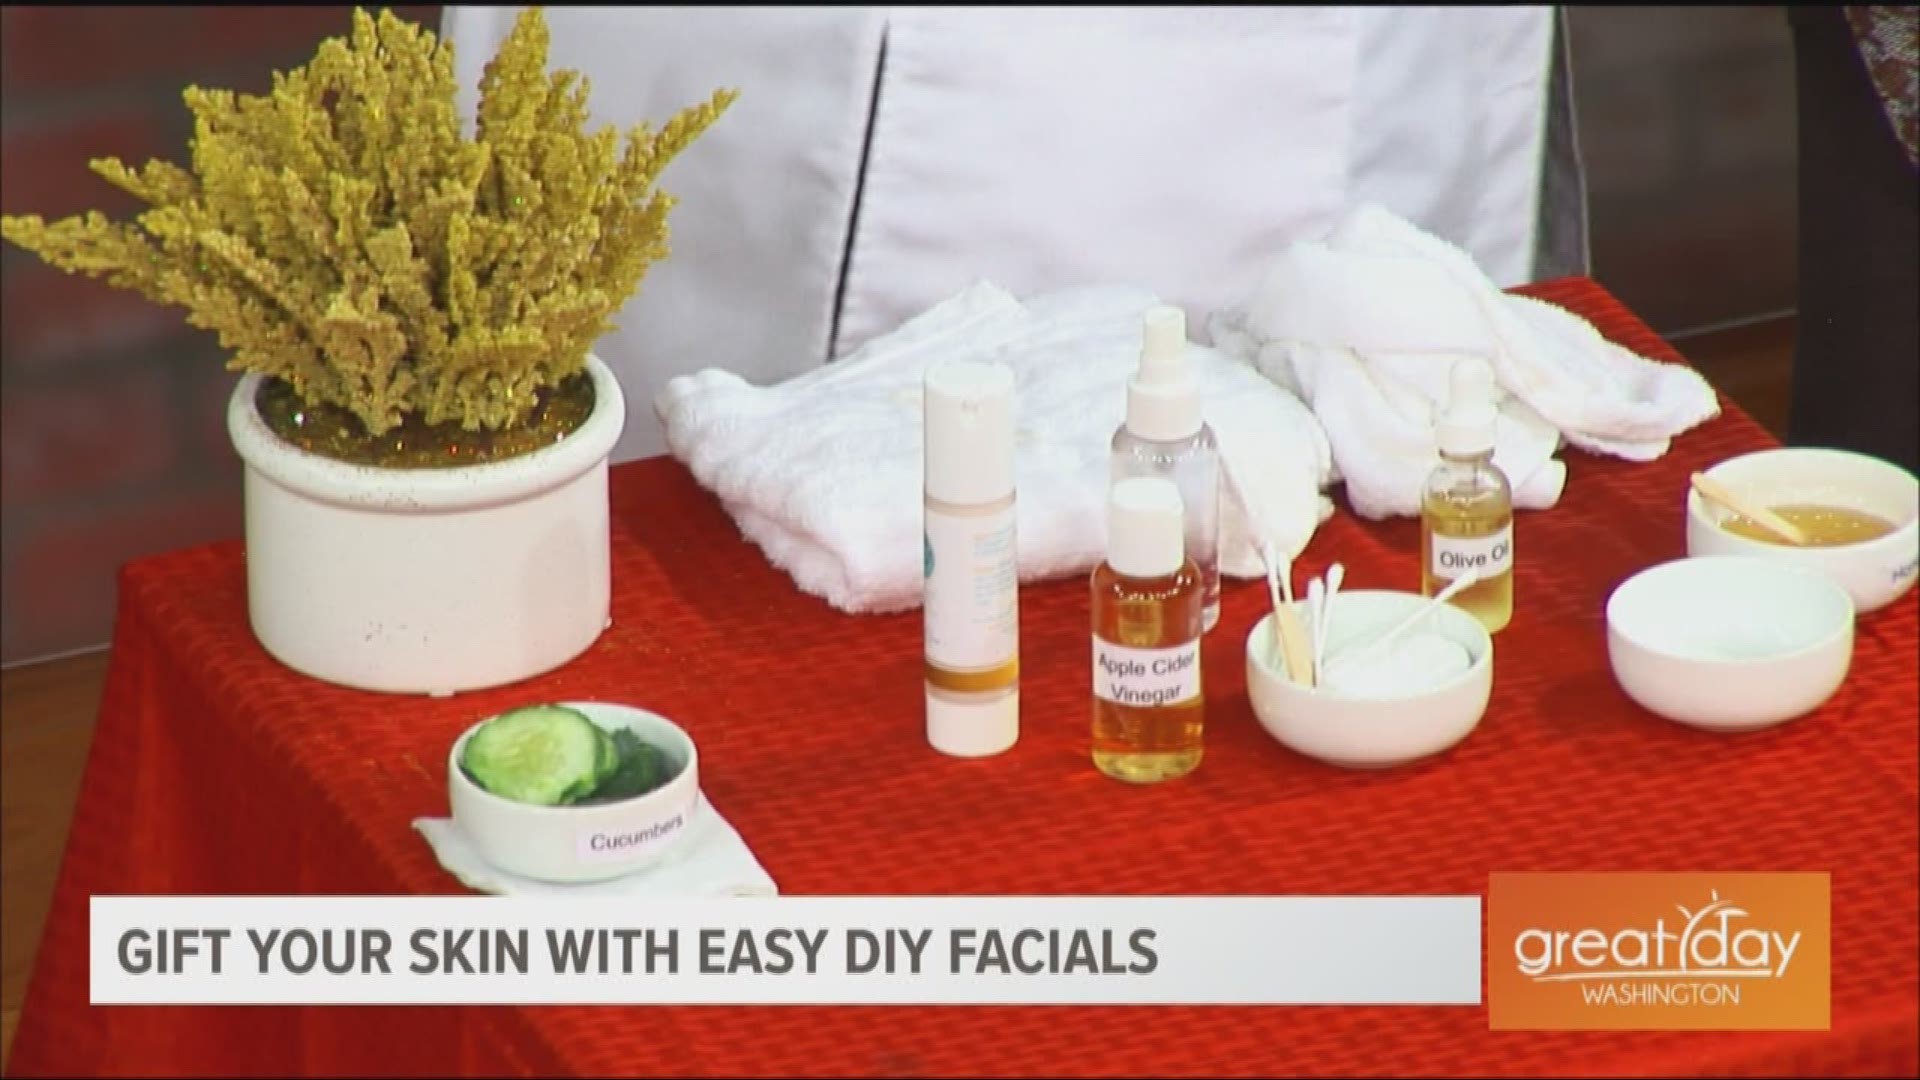 Constance Glow, founder of Constance Glow Skincare offers some tip on how to do a DIY facial for any skin type with some items you probably already have at home!